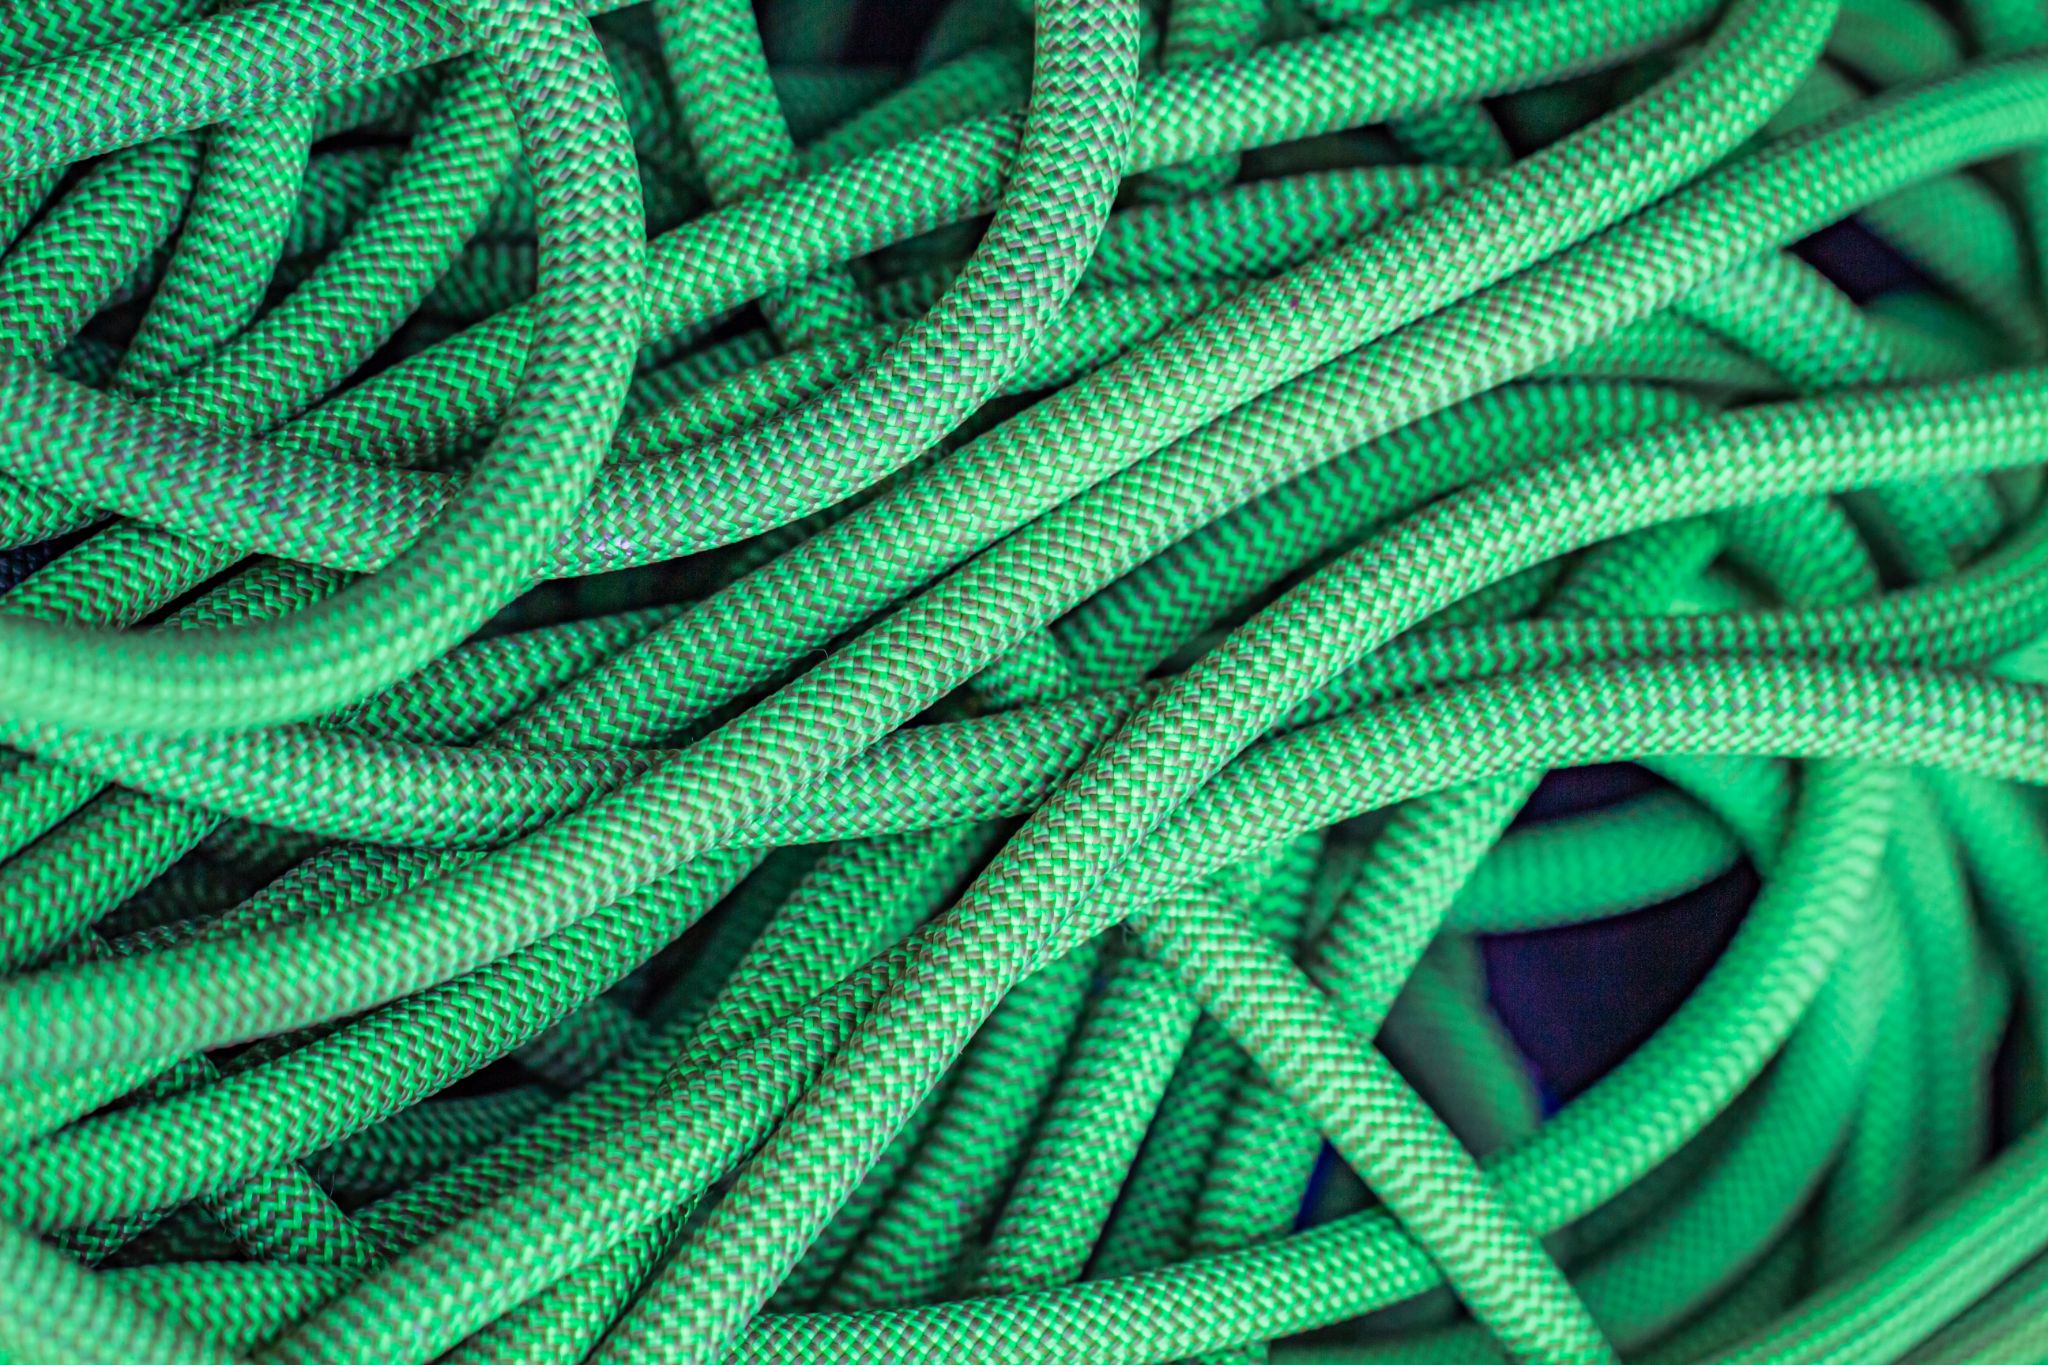 Get The Best Expandable Hose For Your Garden In 2021